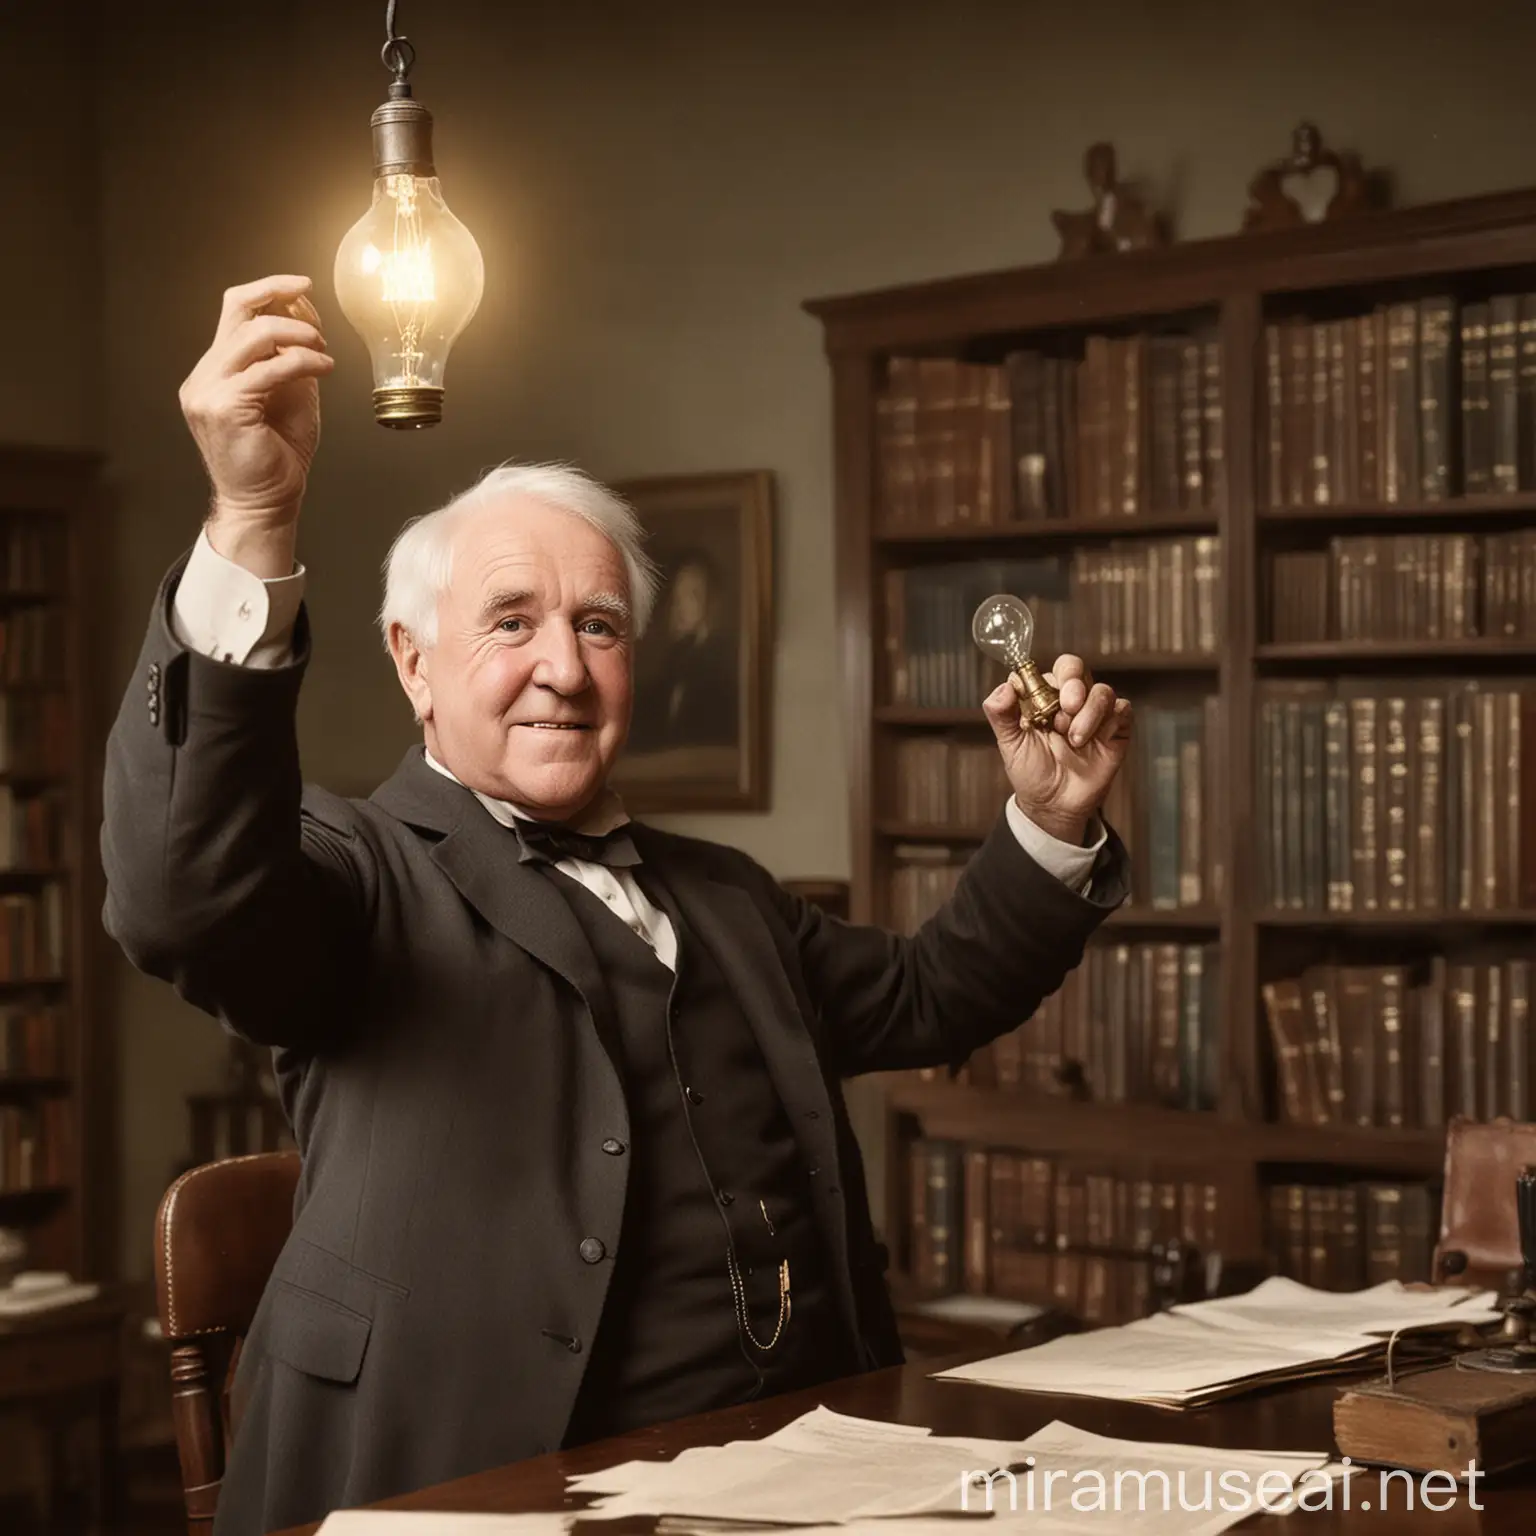 make an image of Thomas Edison happily holding up a lightbulb in his office